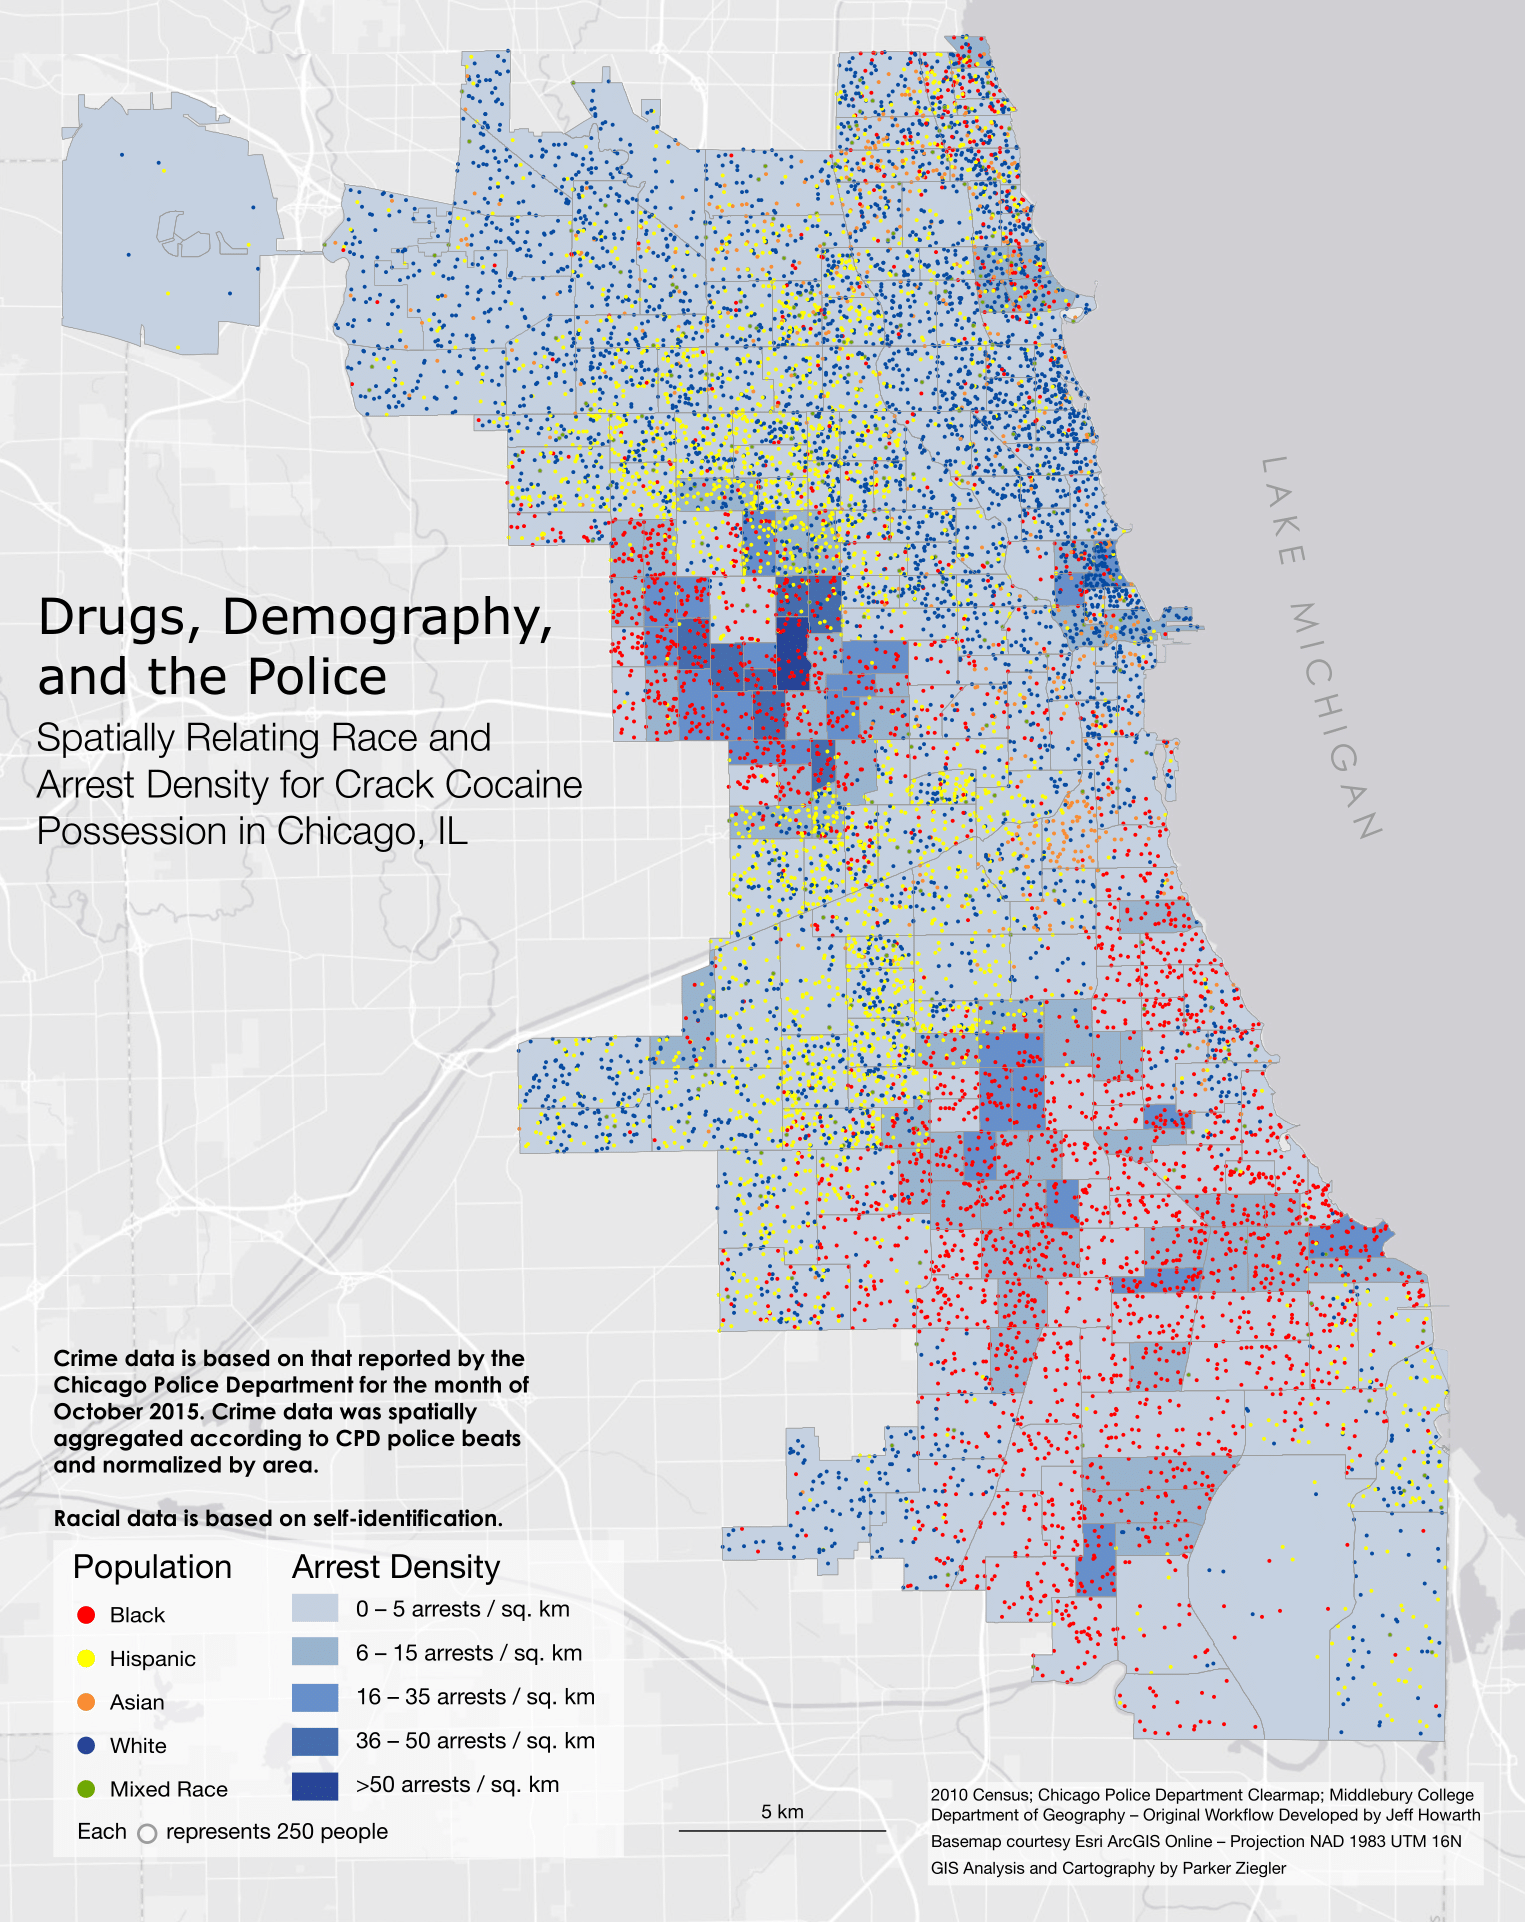 A map spatially correlating race and arrest density for possession of crack cocaine in Chicago, IL.